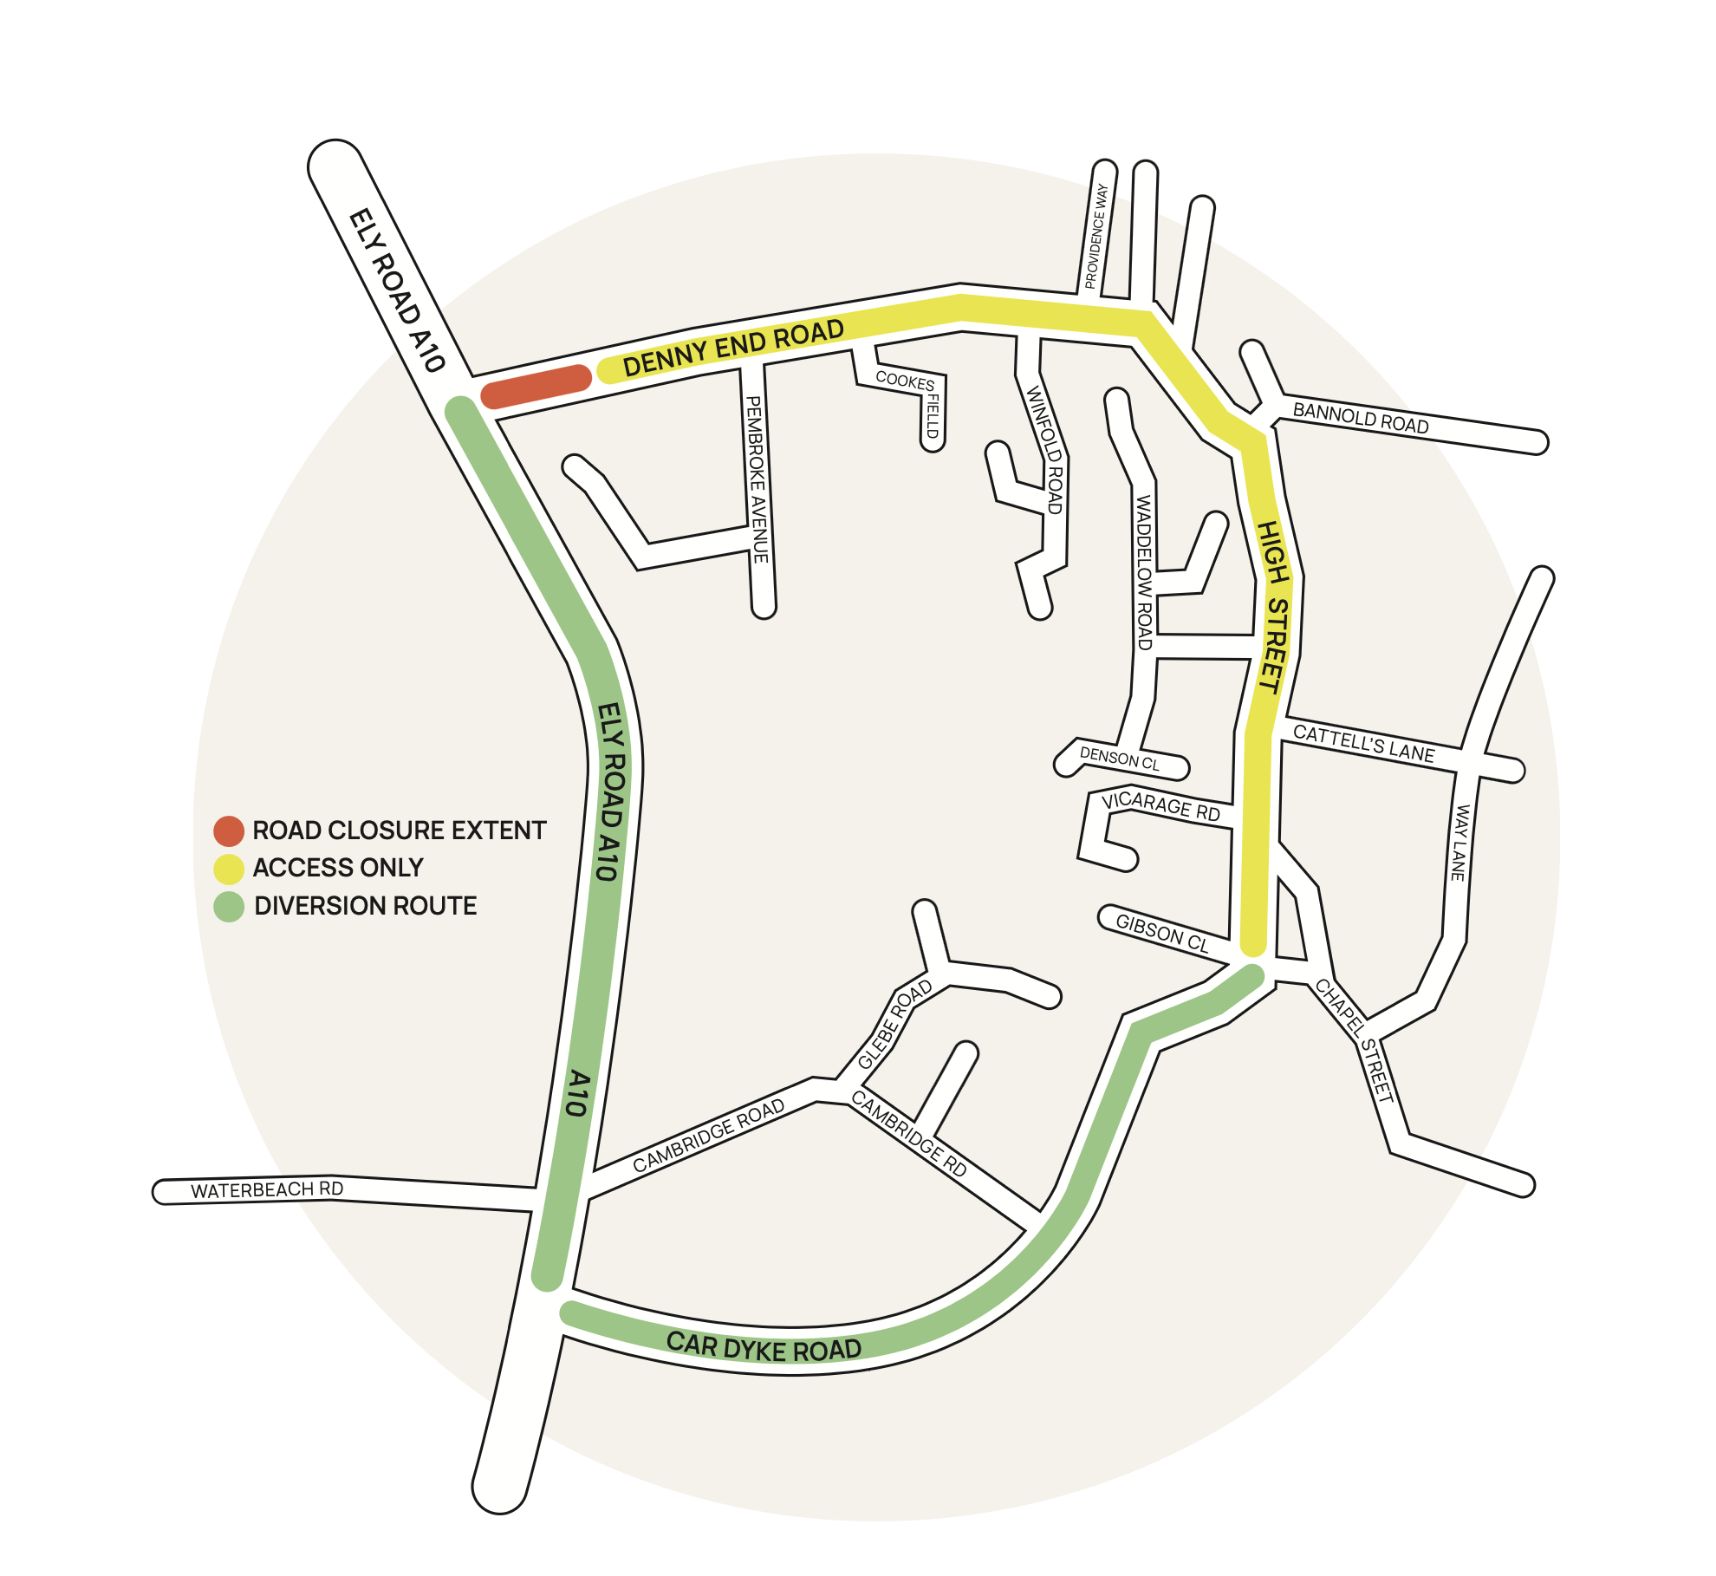 diagram of diversion route. Showing road closure on Denny Abbey road at the junction of Ely Road A10 and access only from the junection to the junction of High Street and Chapel Street